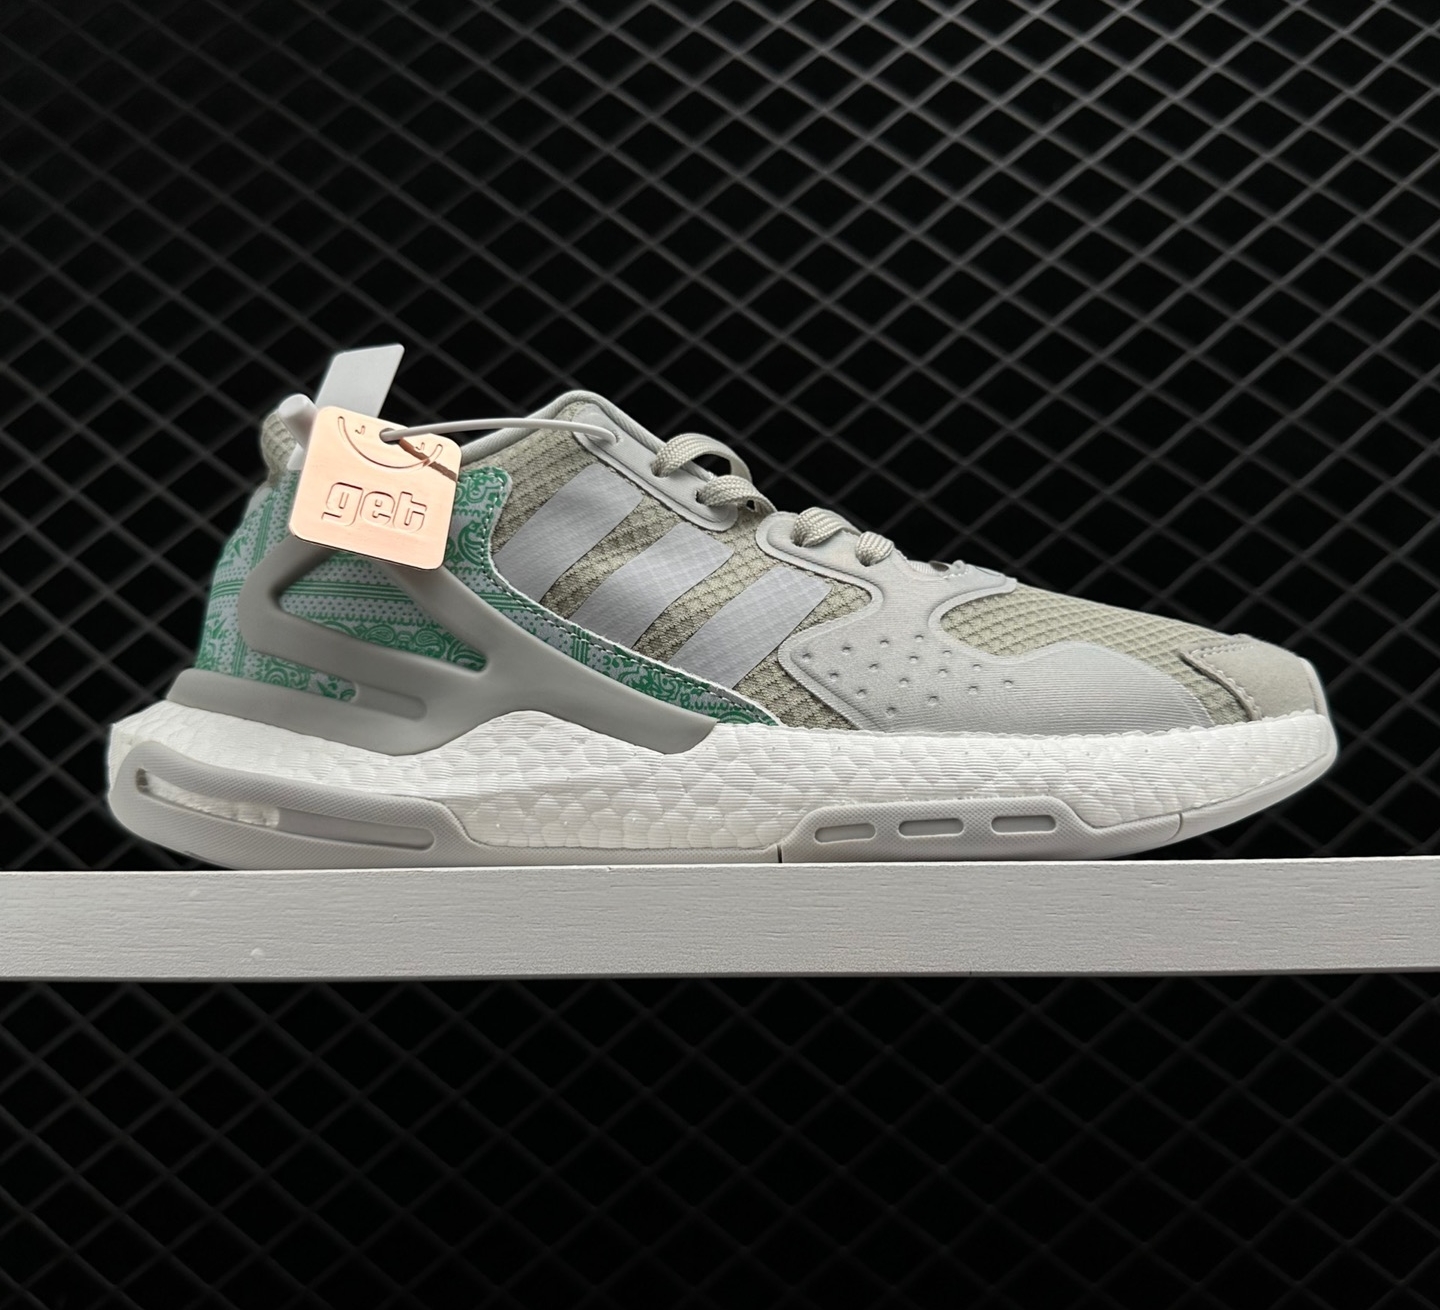 Adidas Day Jogger 2020 Boost Cloud White Grey Green - FW4539